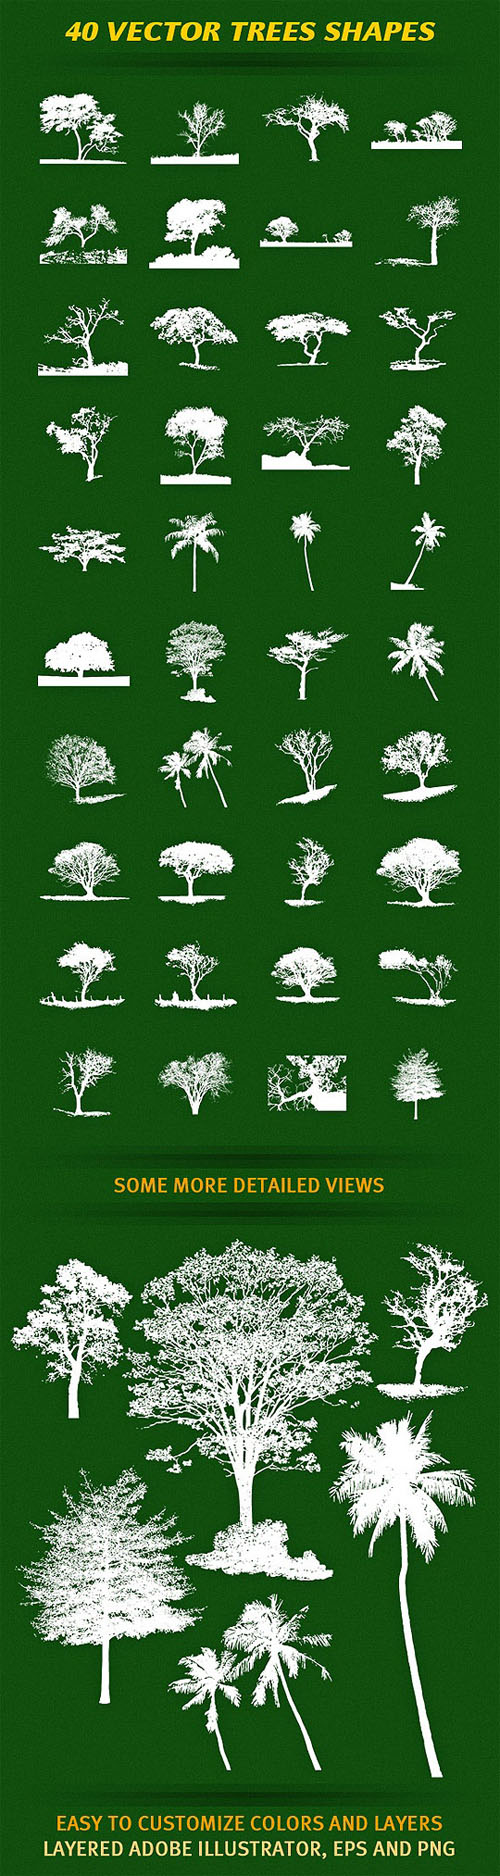 40 Vector Trees Shapes EPS&PNG